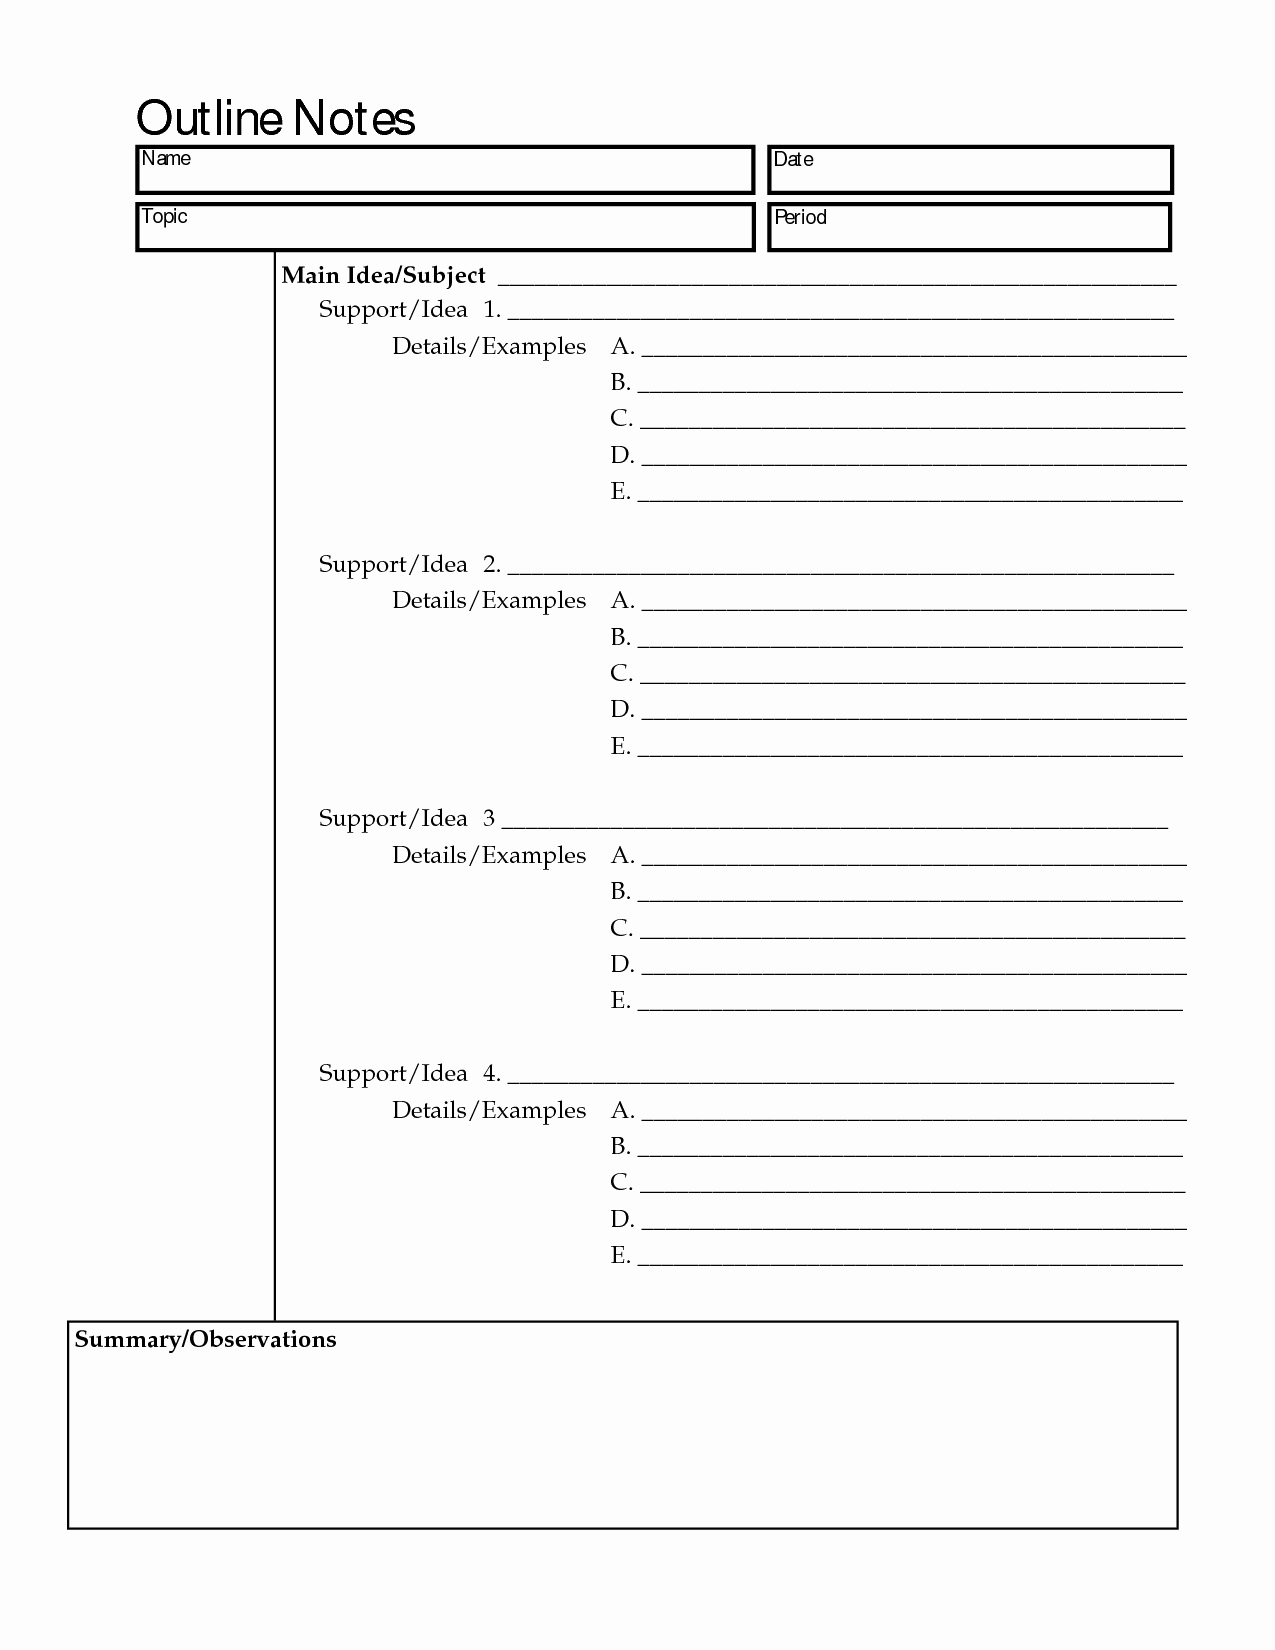 4 Year Degree Plan Template Luxury Note Taking Outline Template Outline